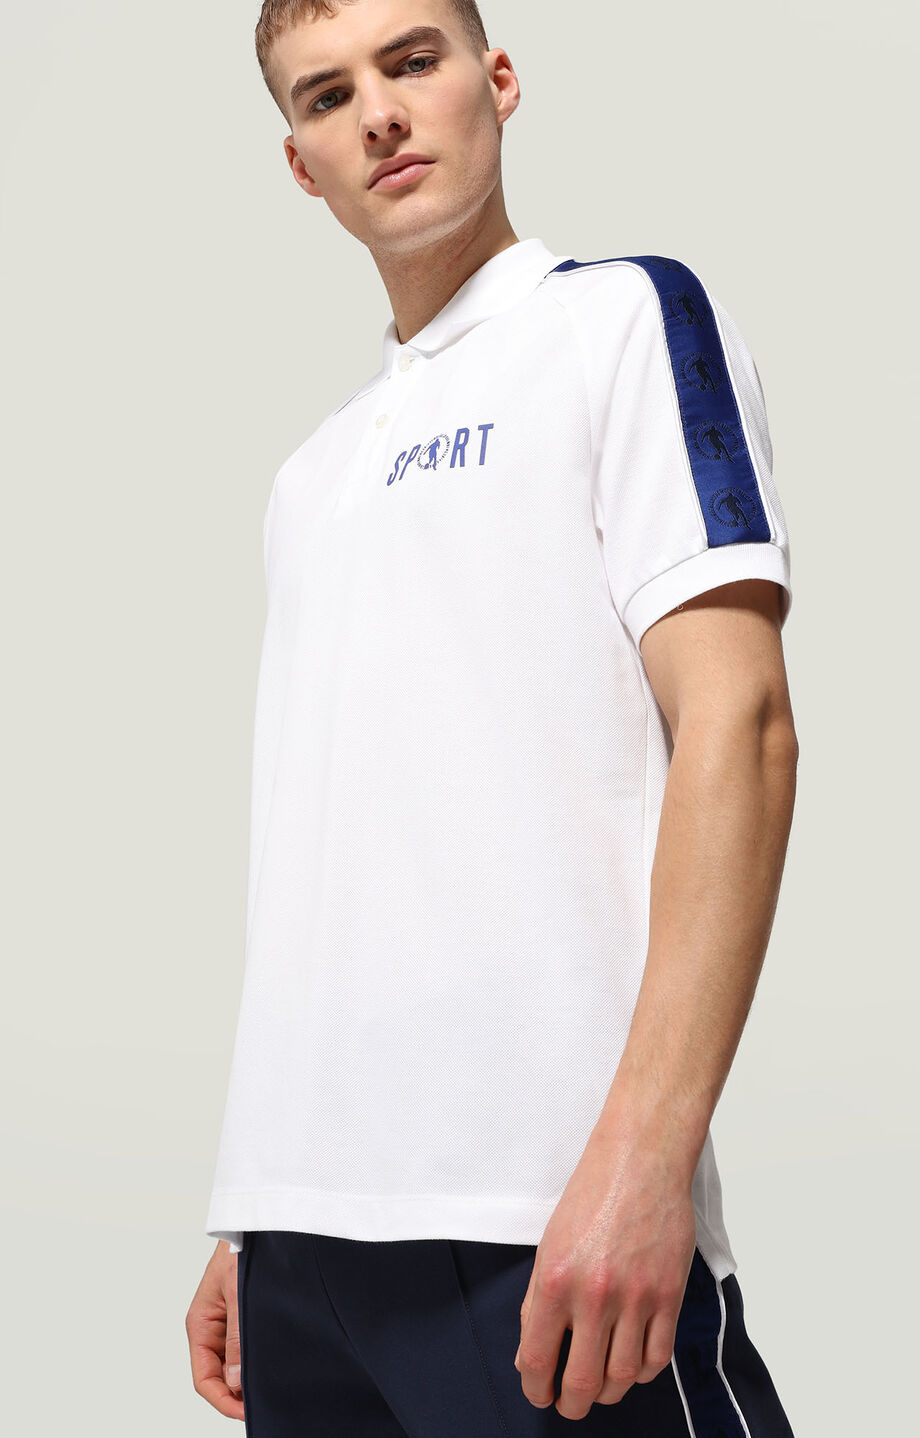 MEN'S POLO SHIRT WITH SOCCER PLAYER PRINT